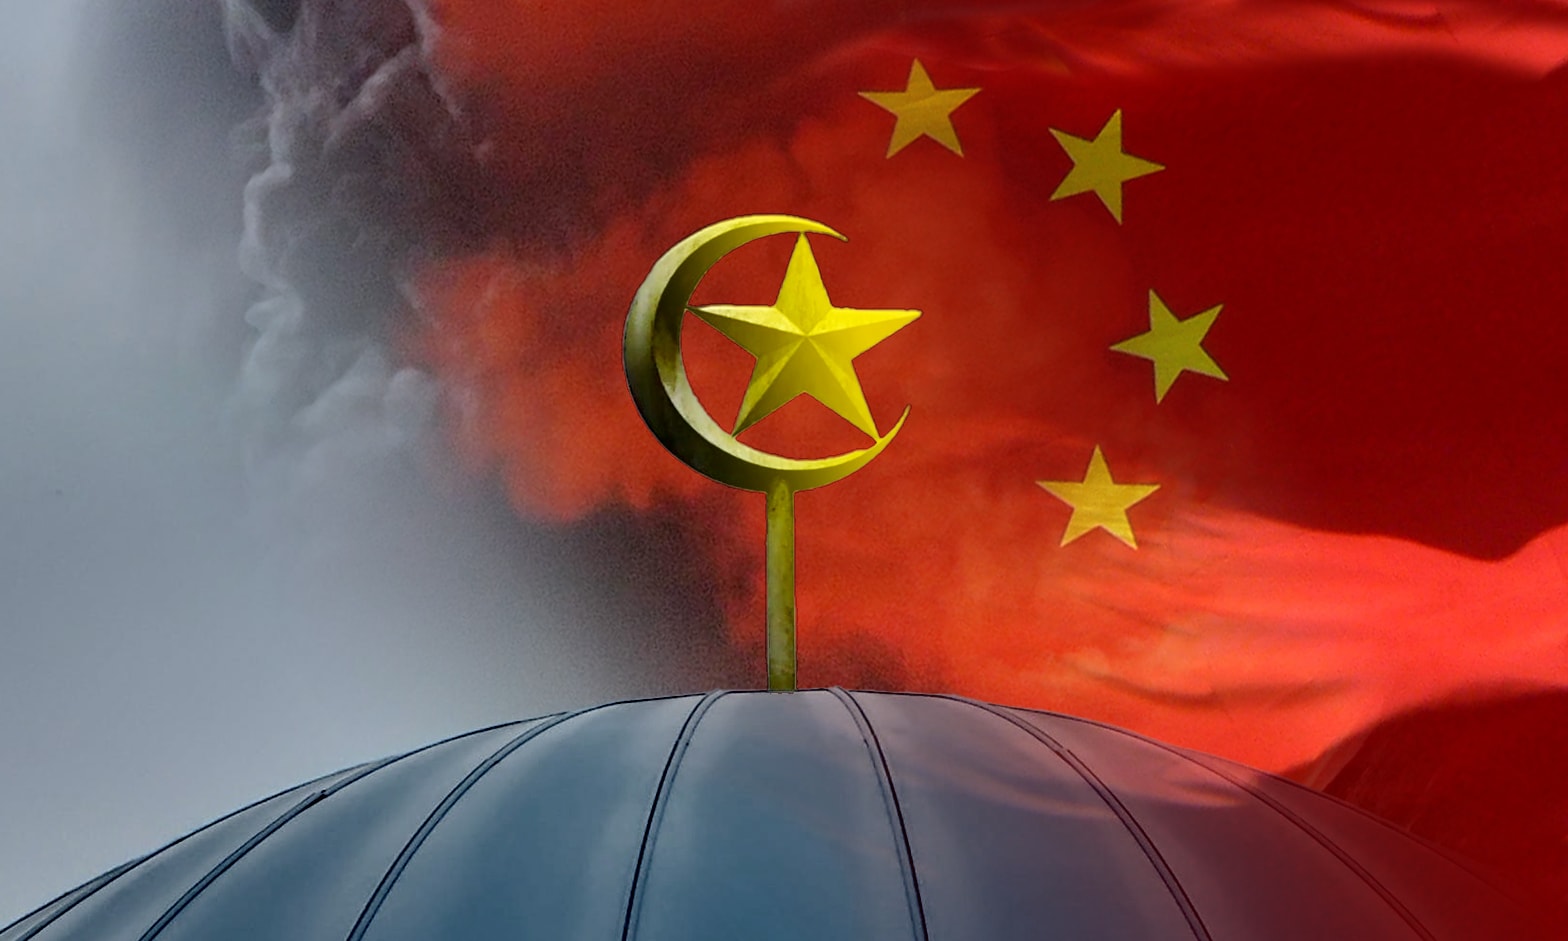 Article Header Design: “The war in Gaza and China’s pivot to the Middle East”